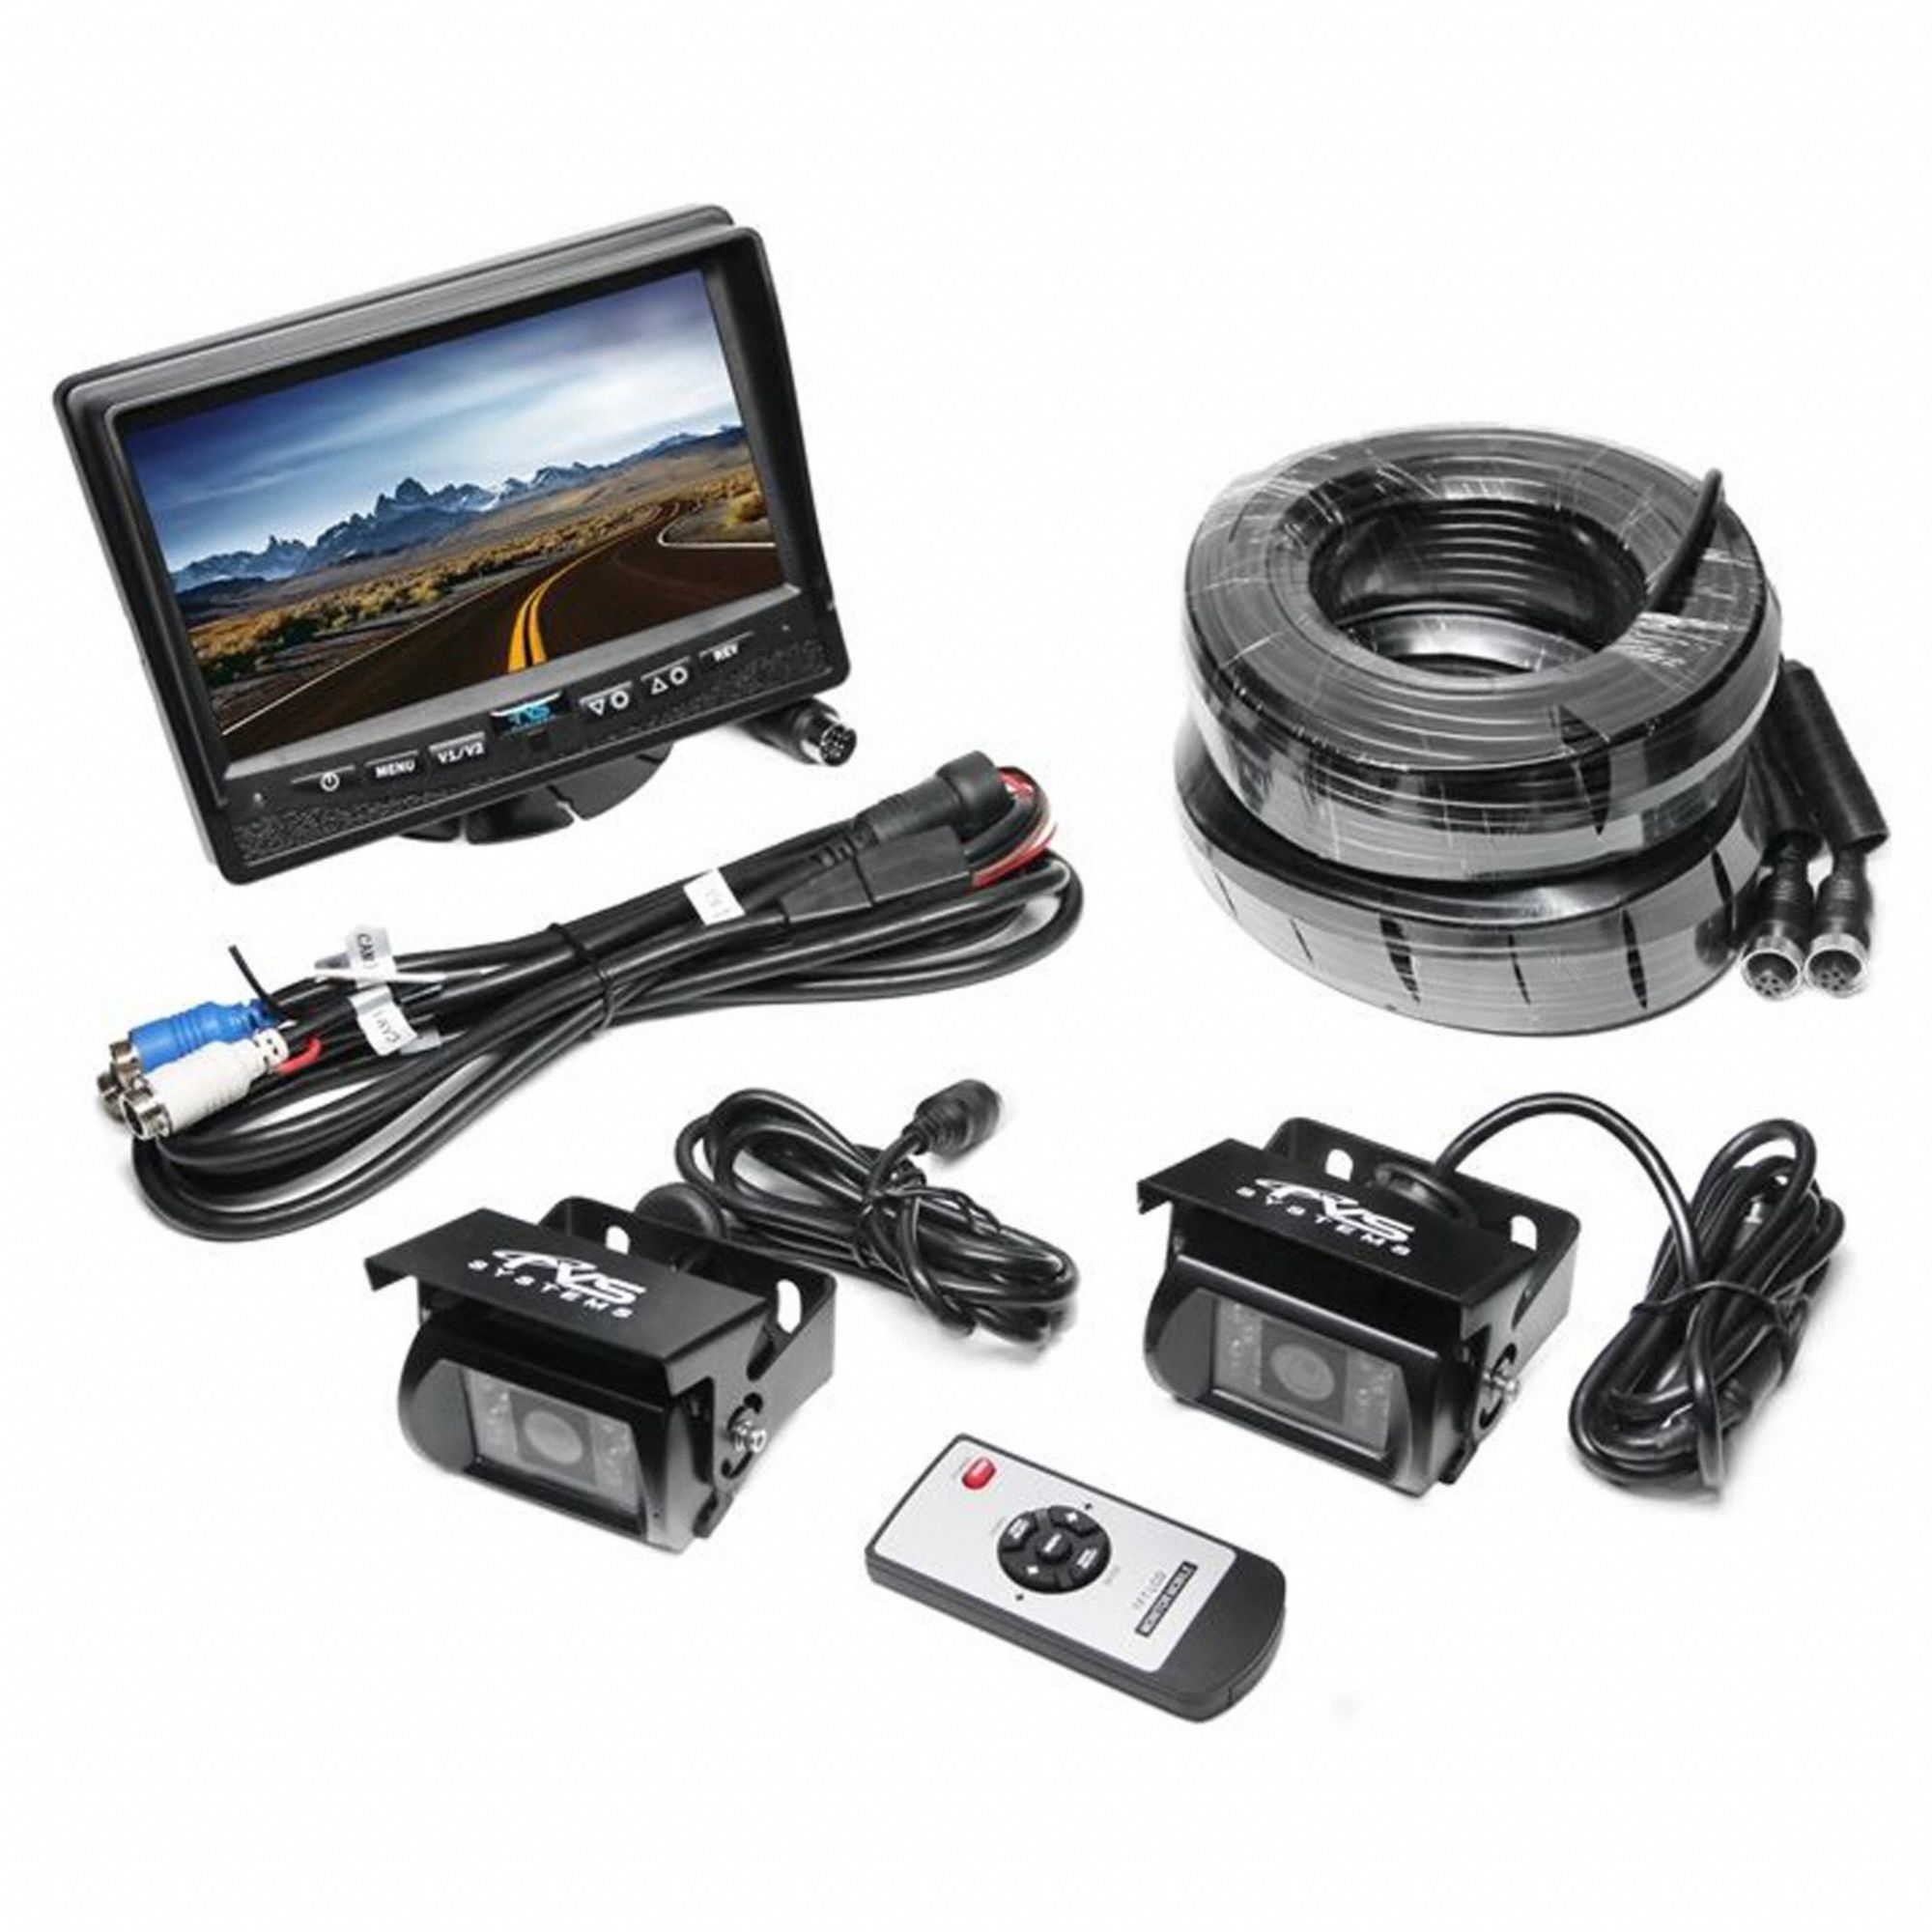 Rear View Camera System: CCD, TFT-LCD, 130° Viewing Angle, 410k Pixels